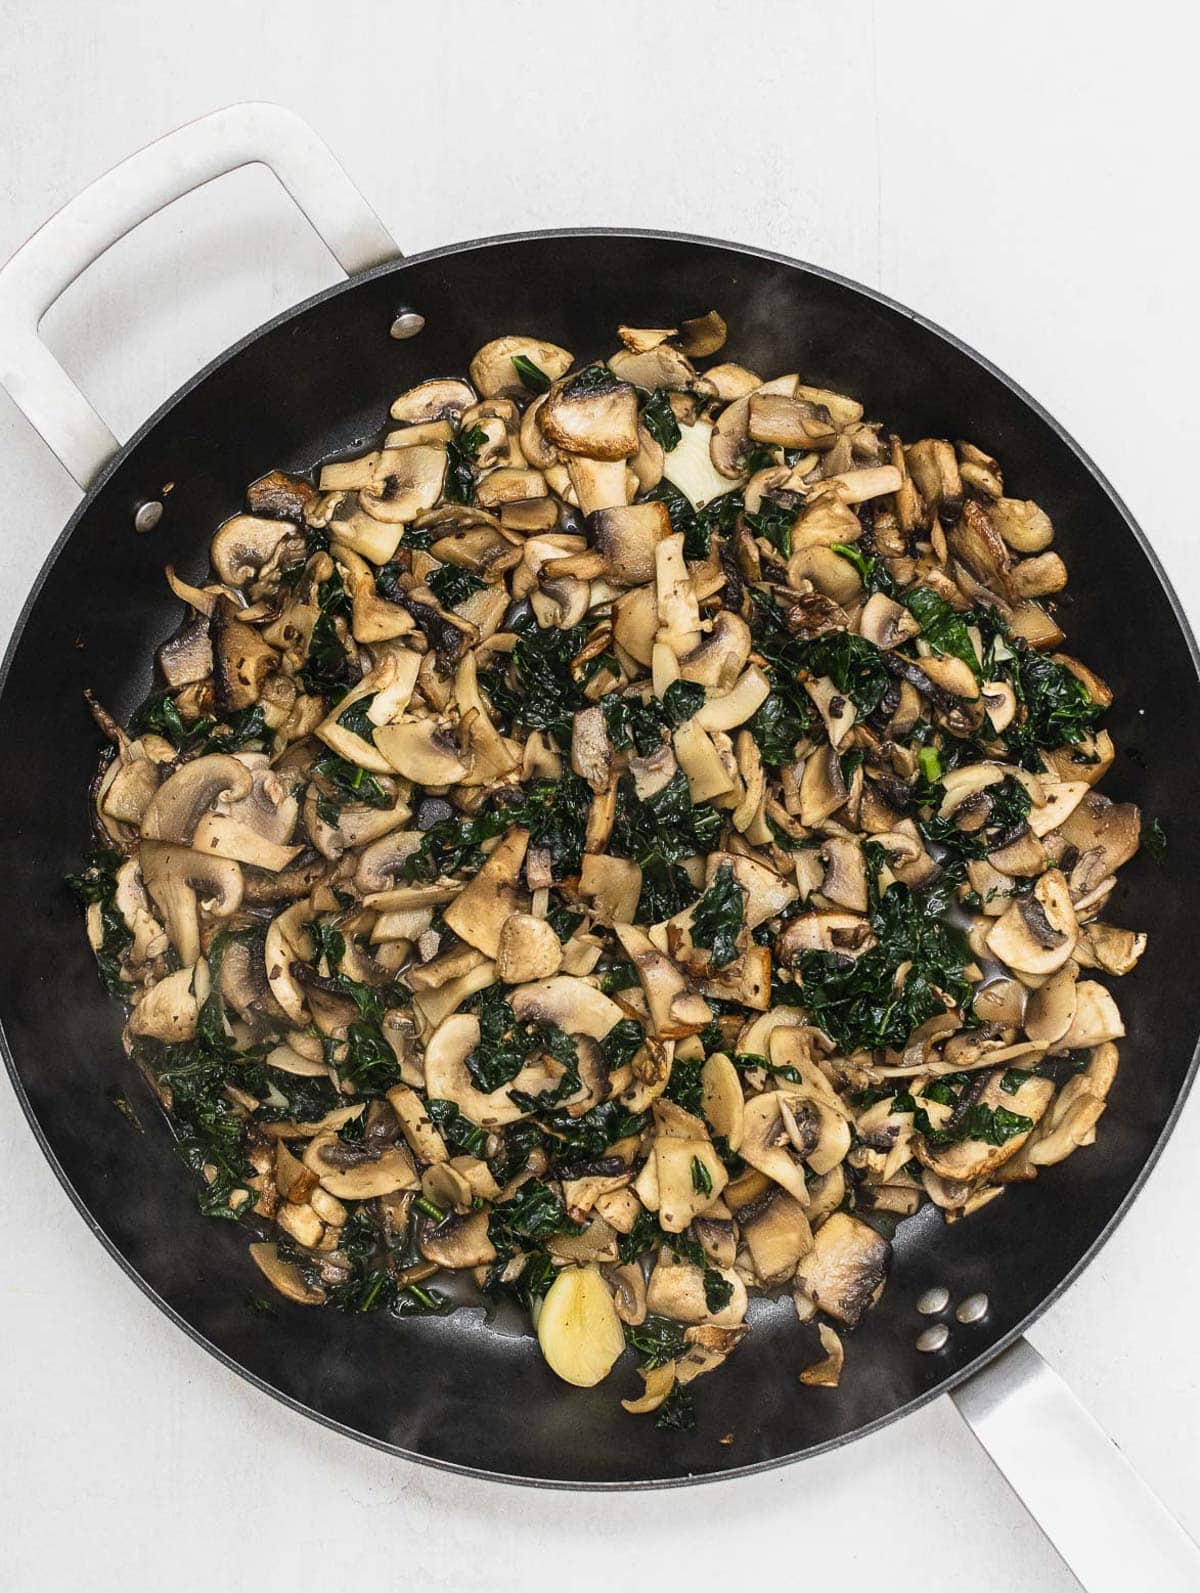 cooked mushrooms and kale for crepe filling